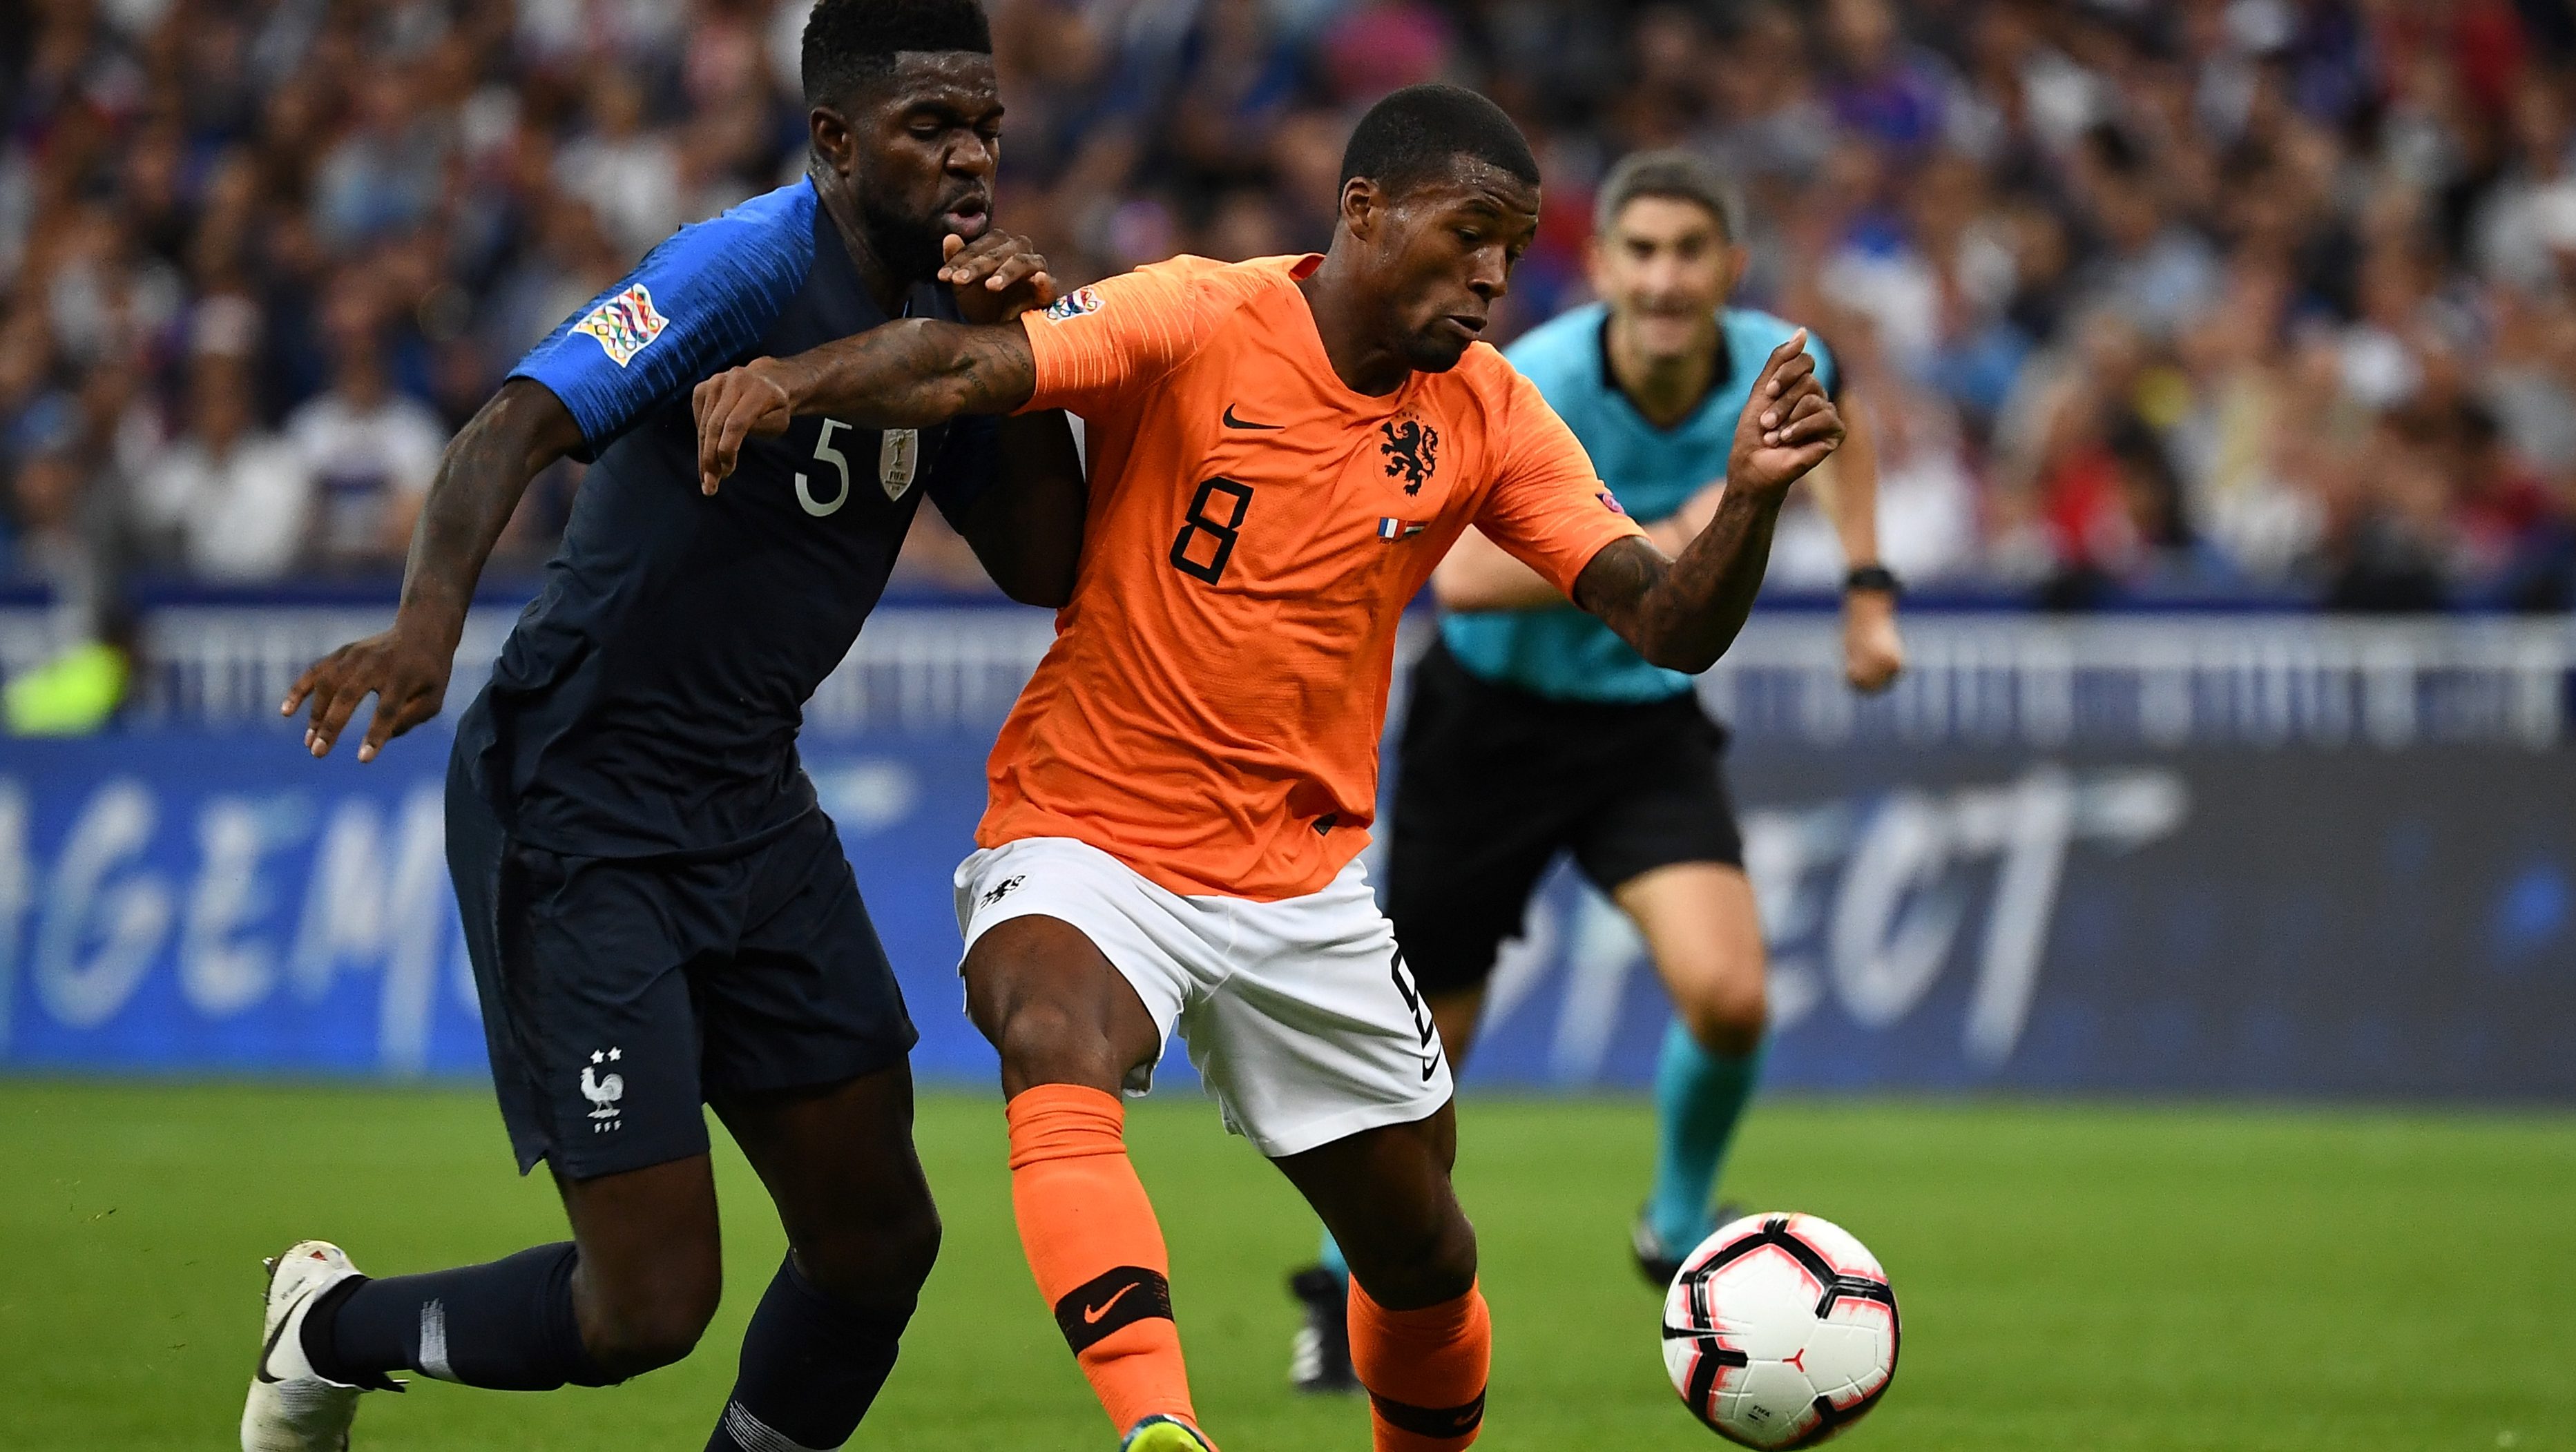 How to Watch Netherlands vs France Online Without Cable